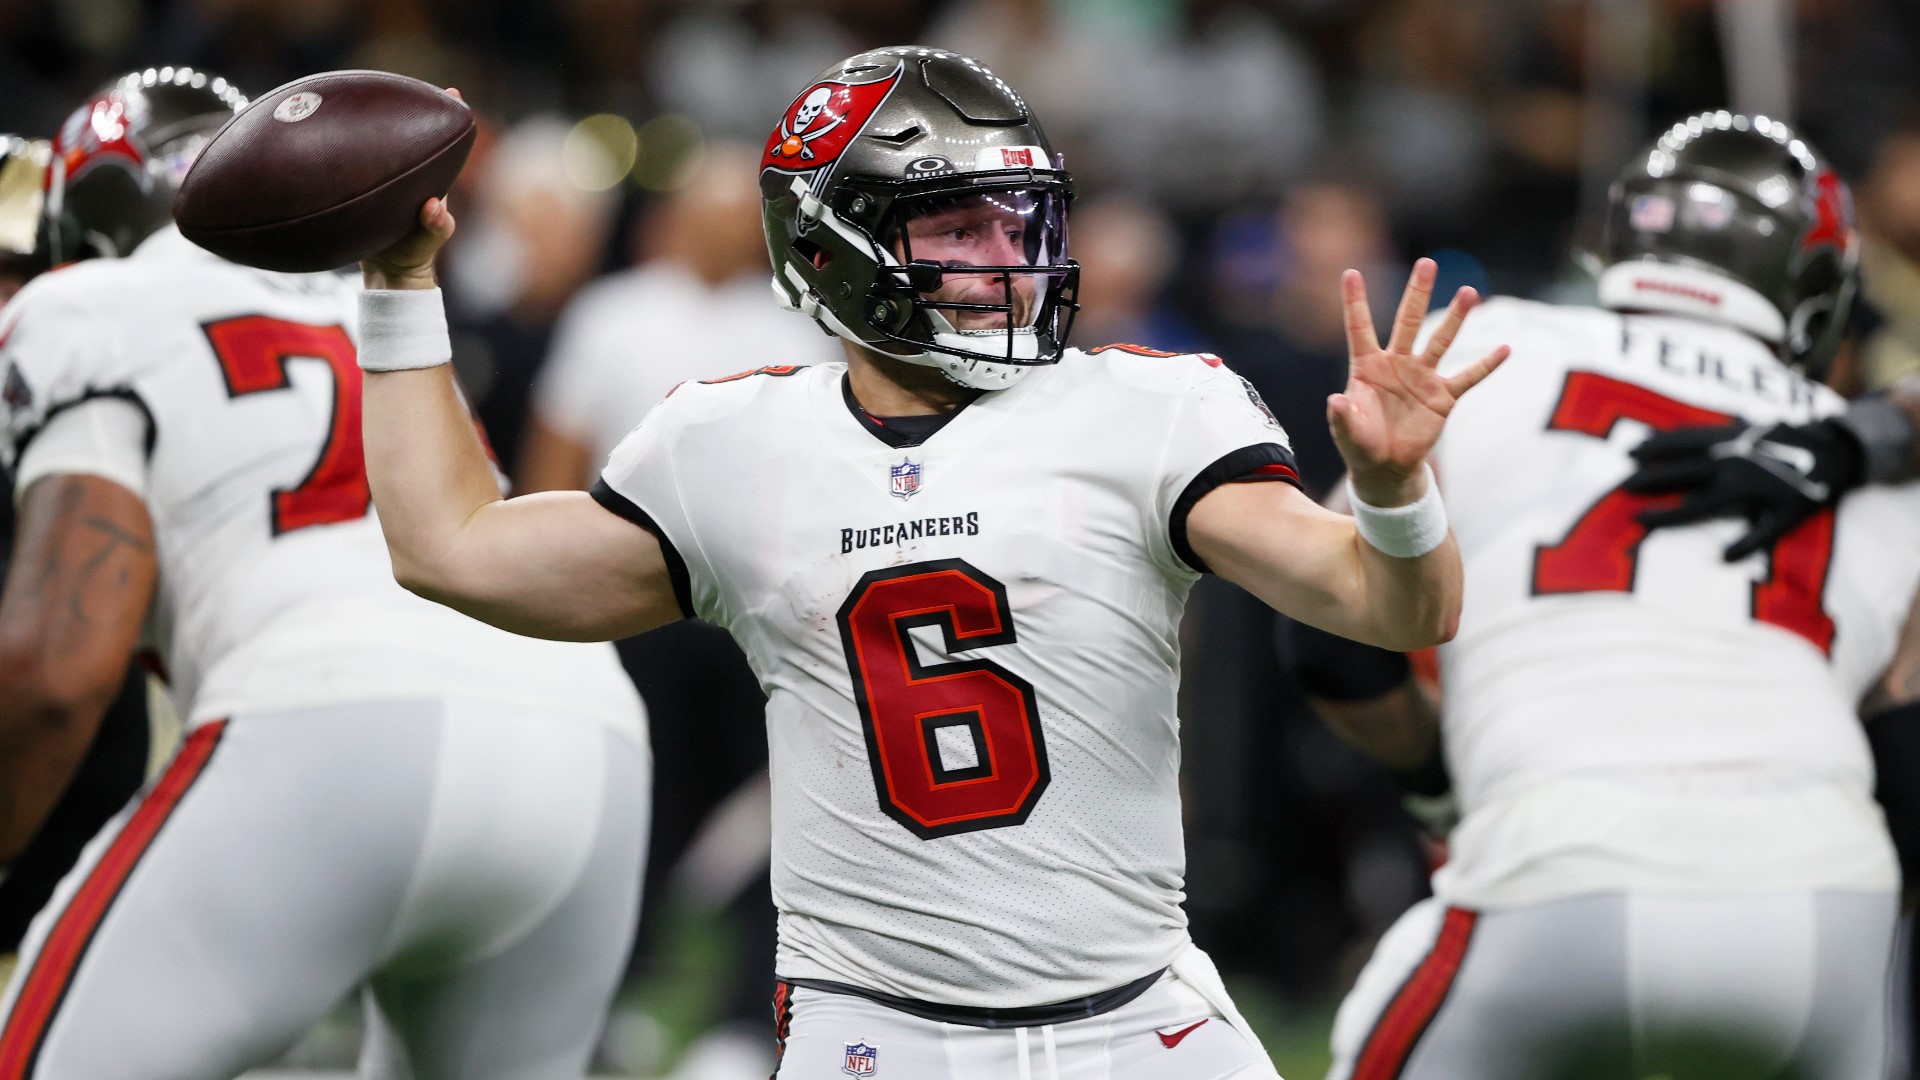 The Bucs beat rival New Orleans on Sunday, 26-9. It's the first time in series history that Tampa Bay's beaten the Saints three consecutive times.